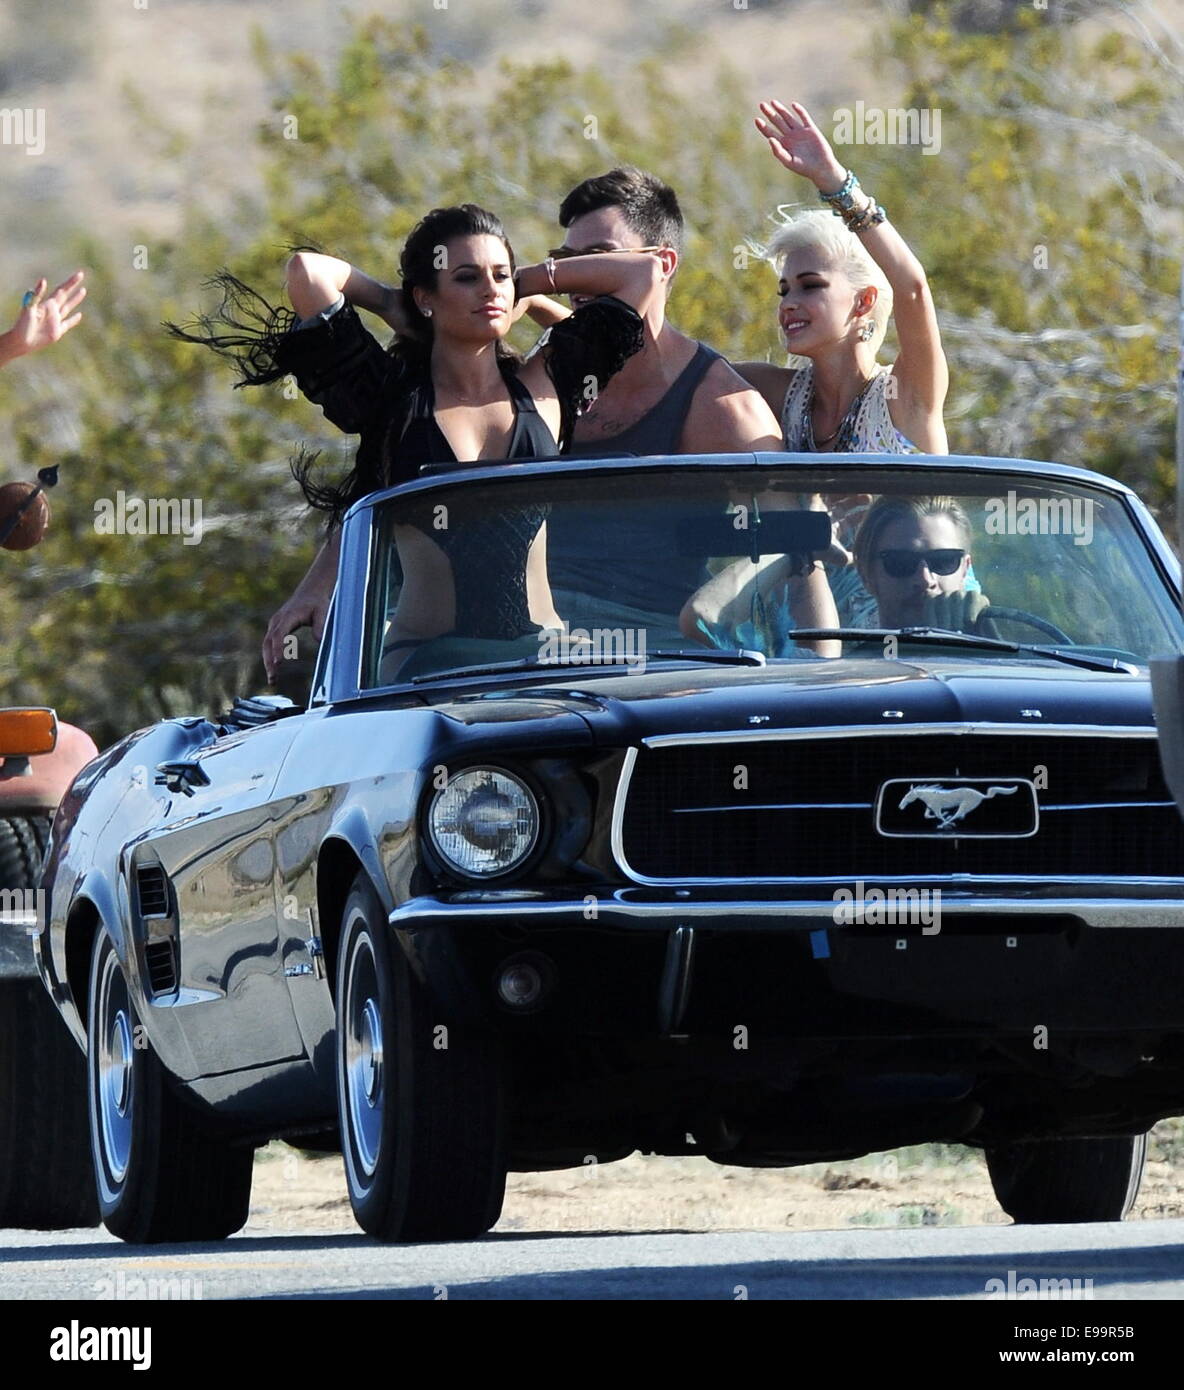 Glee star Lea Michele sports a black one-piece bikini for her new music  video "On My Way", filming in Palmdale, California. The actress can be seen  sitting on top of a black